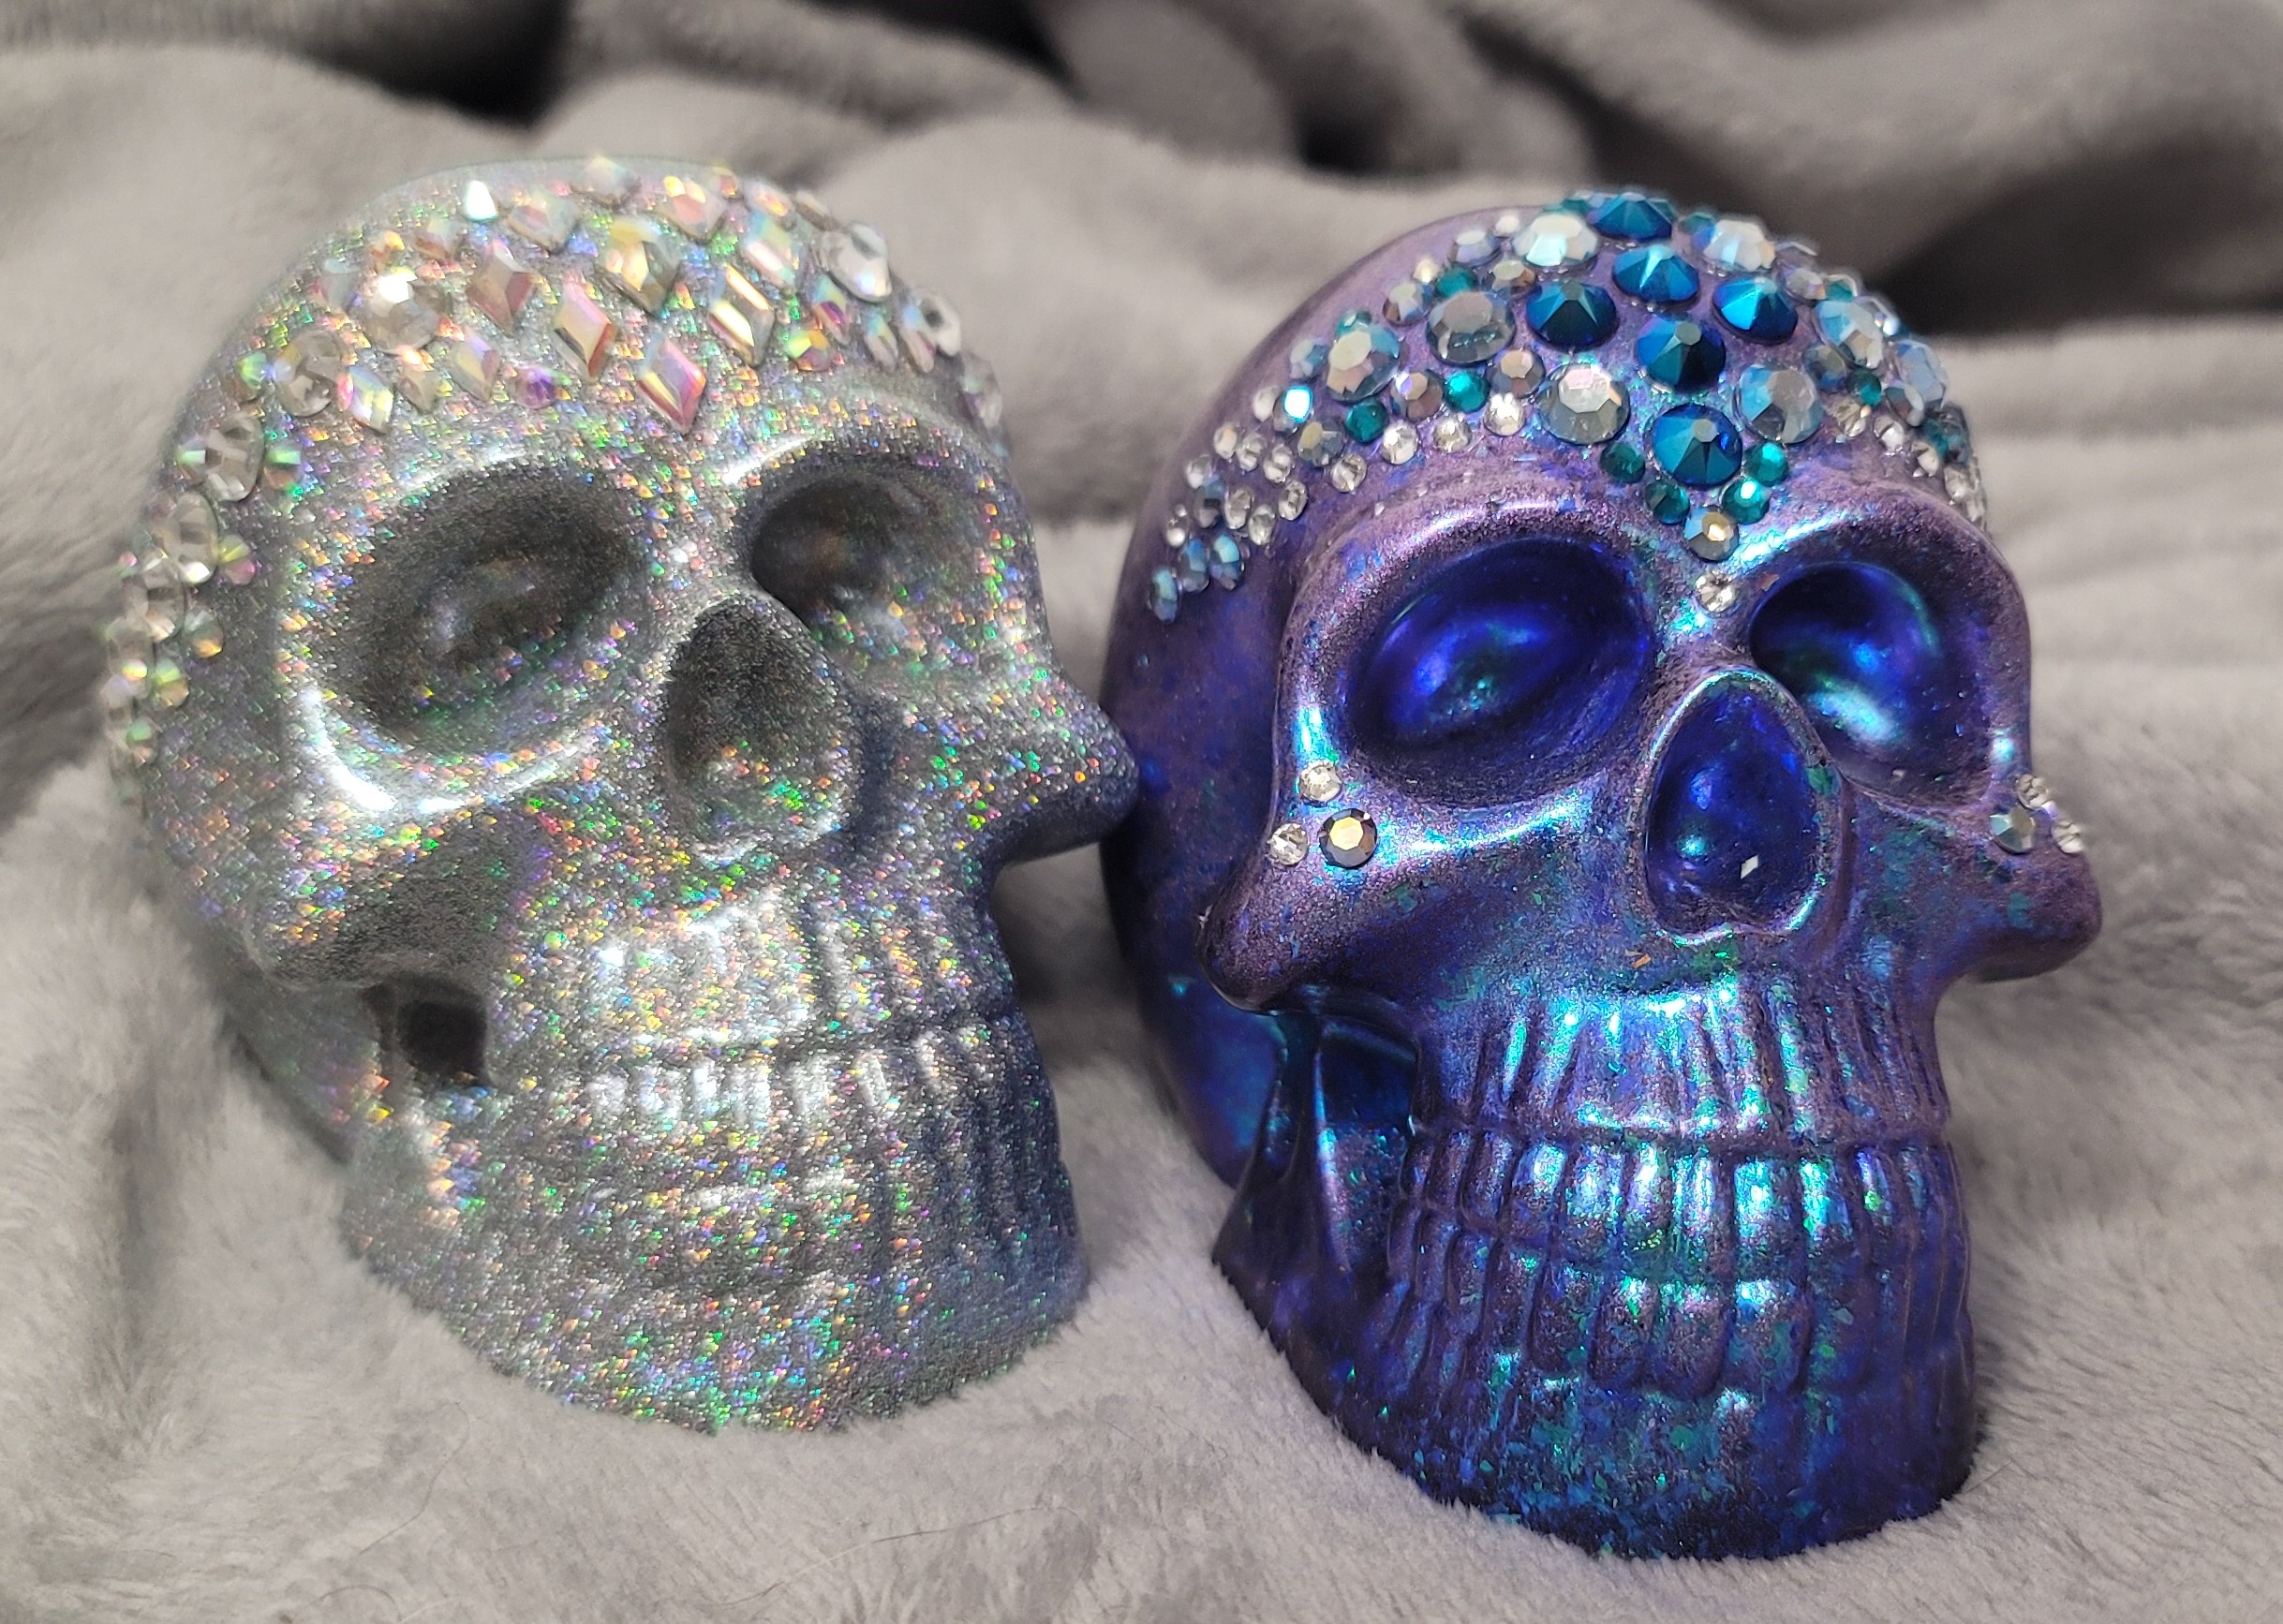 Two resin skulls, one silver with sparkles and one is blue with sparkles.